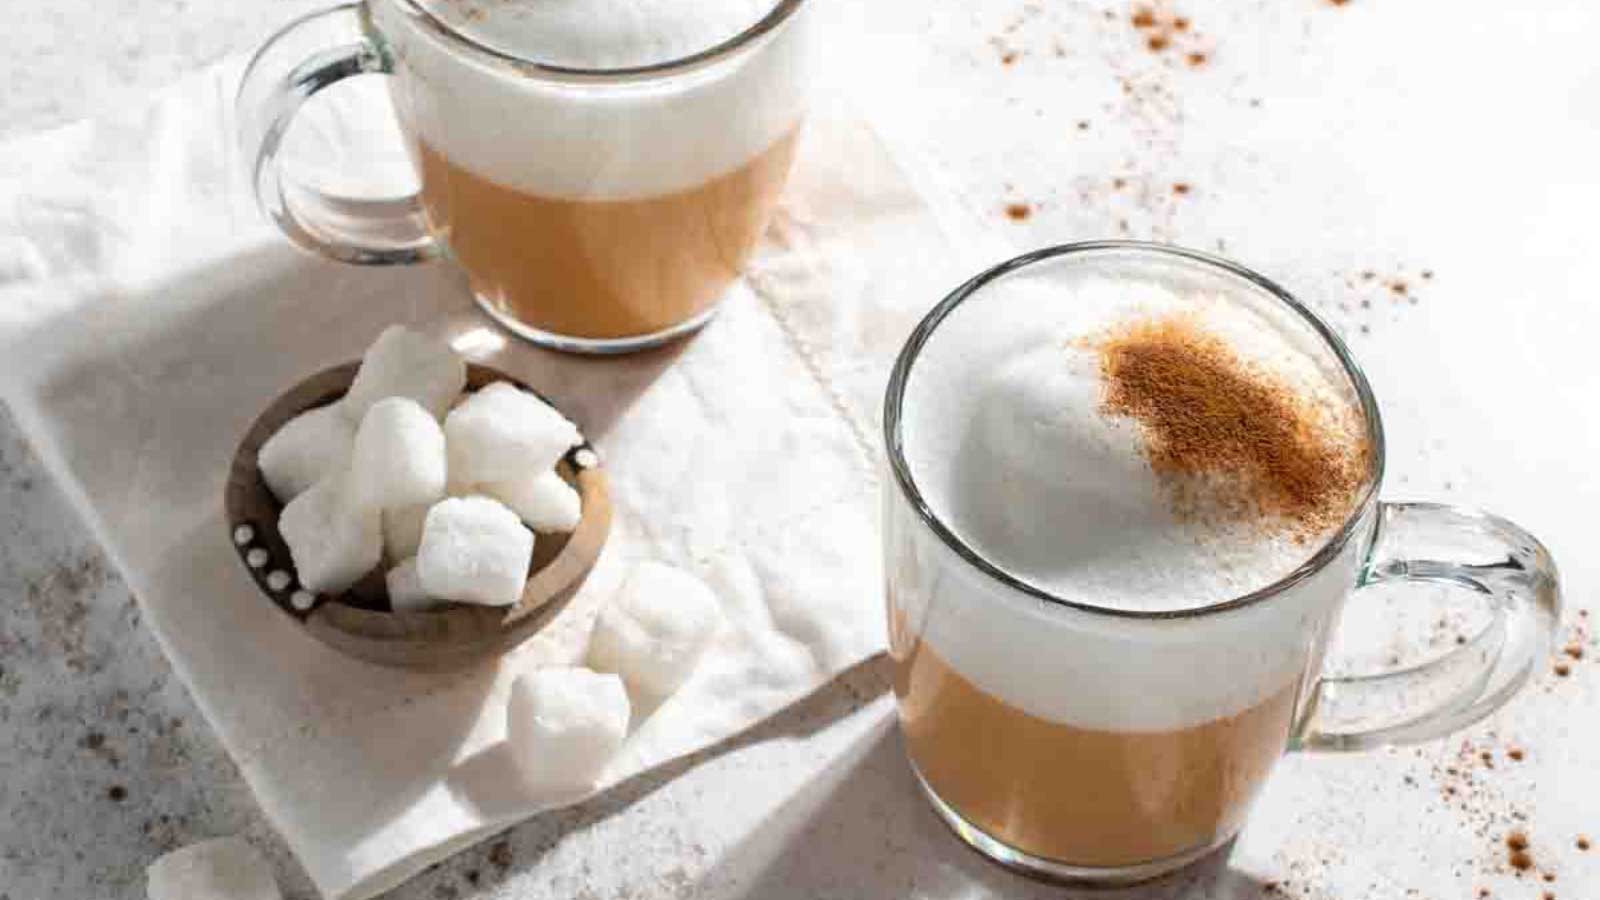 13 Cozy Tea Drinks You’ll Go Crazy For This Winter